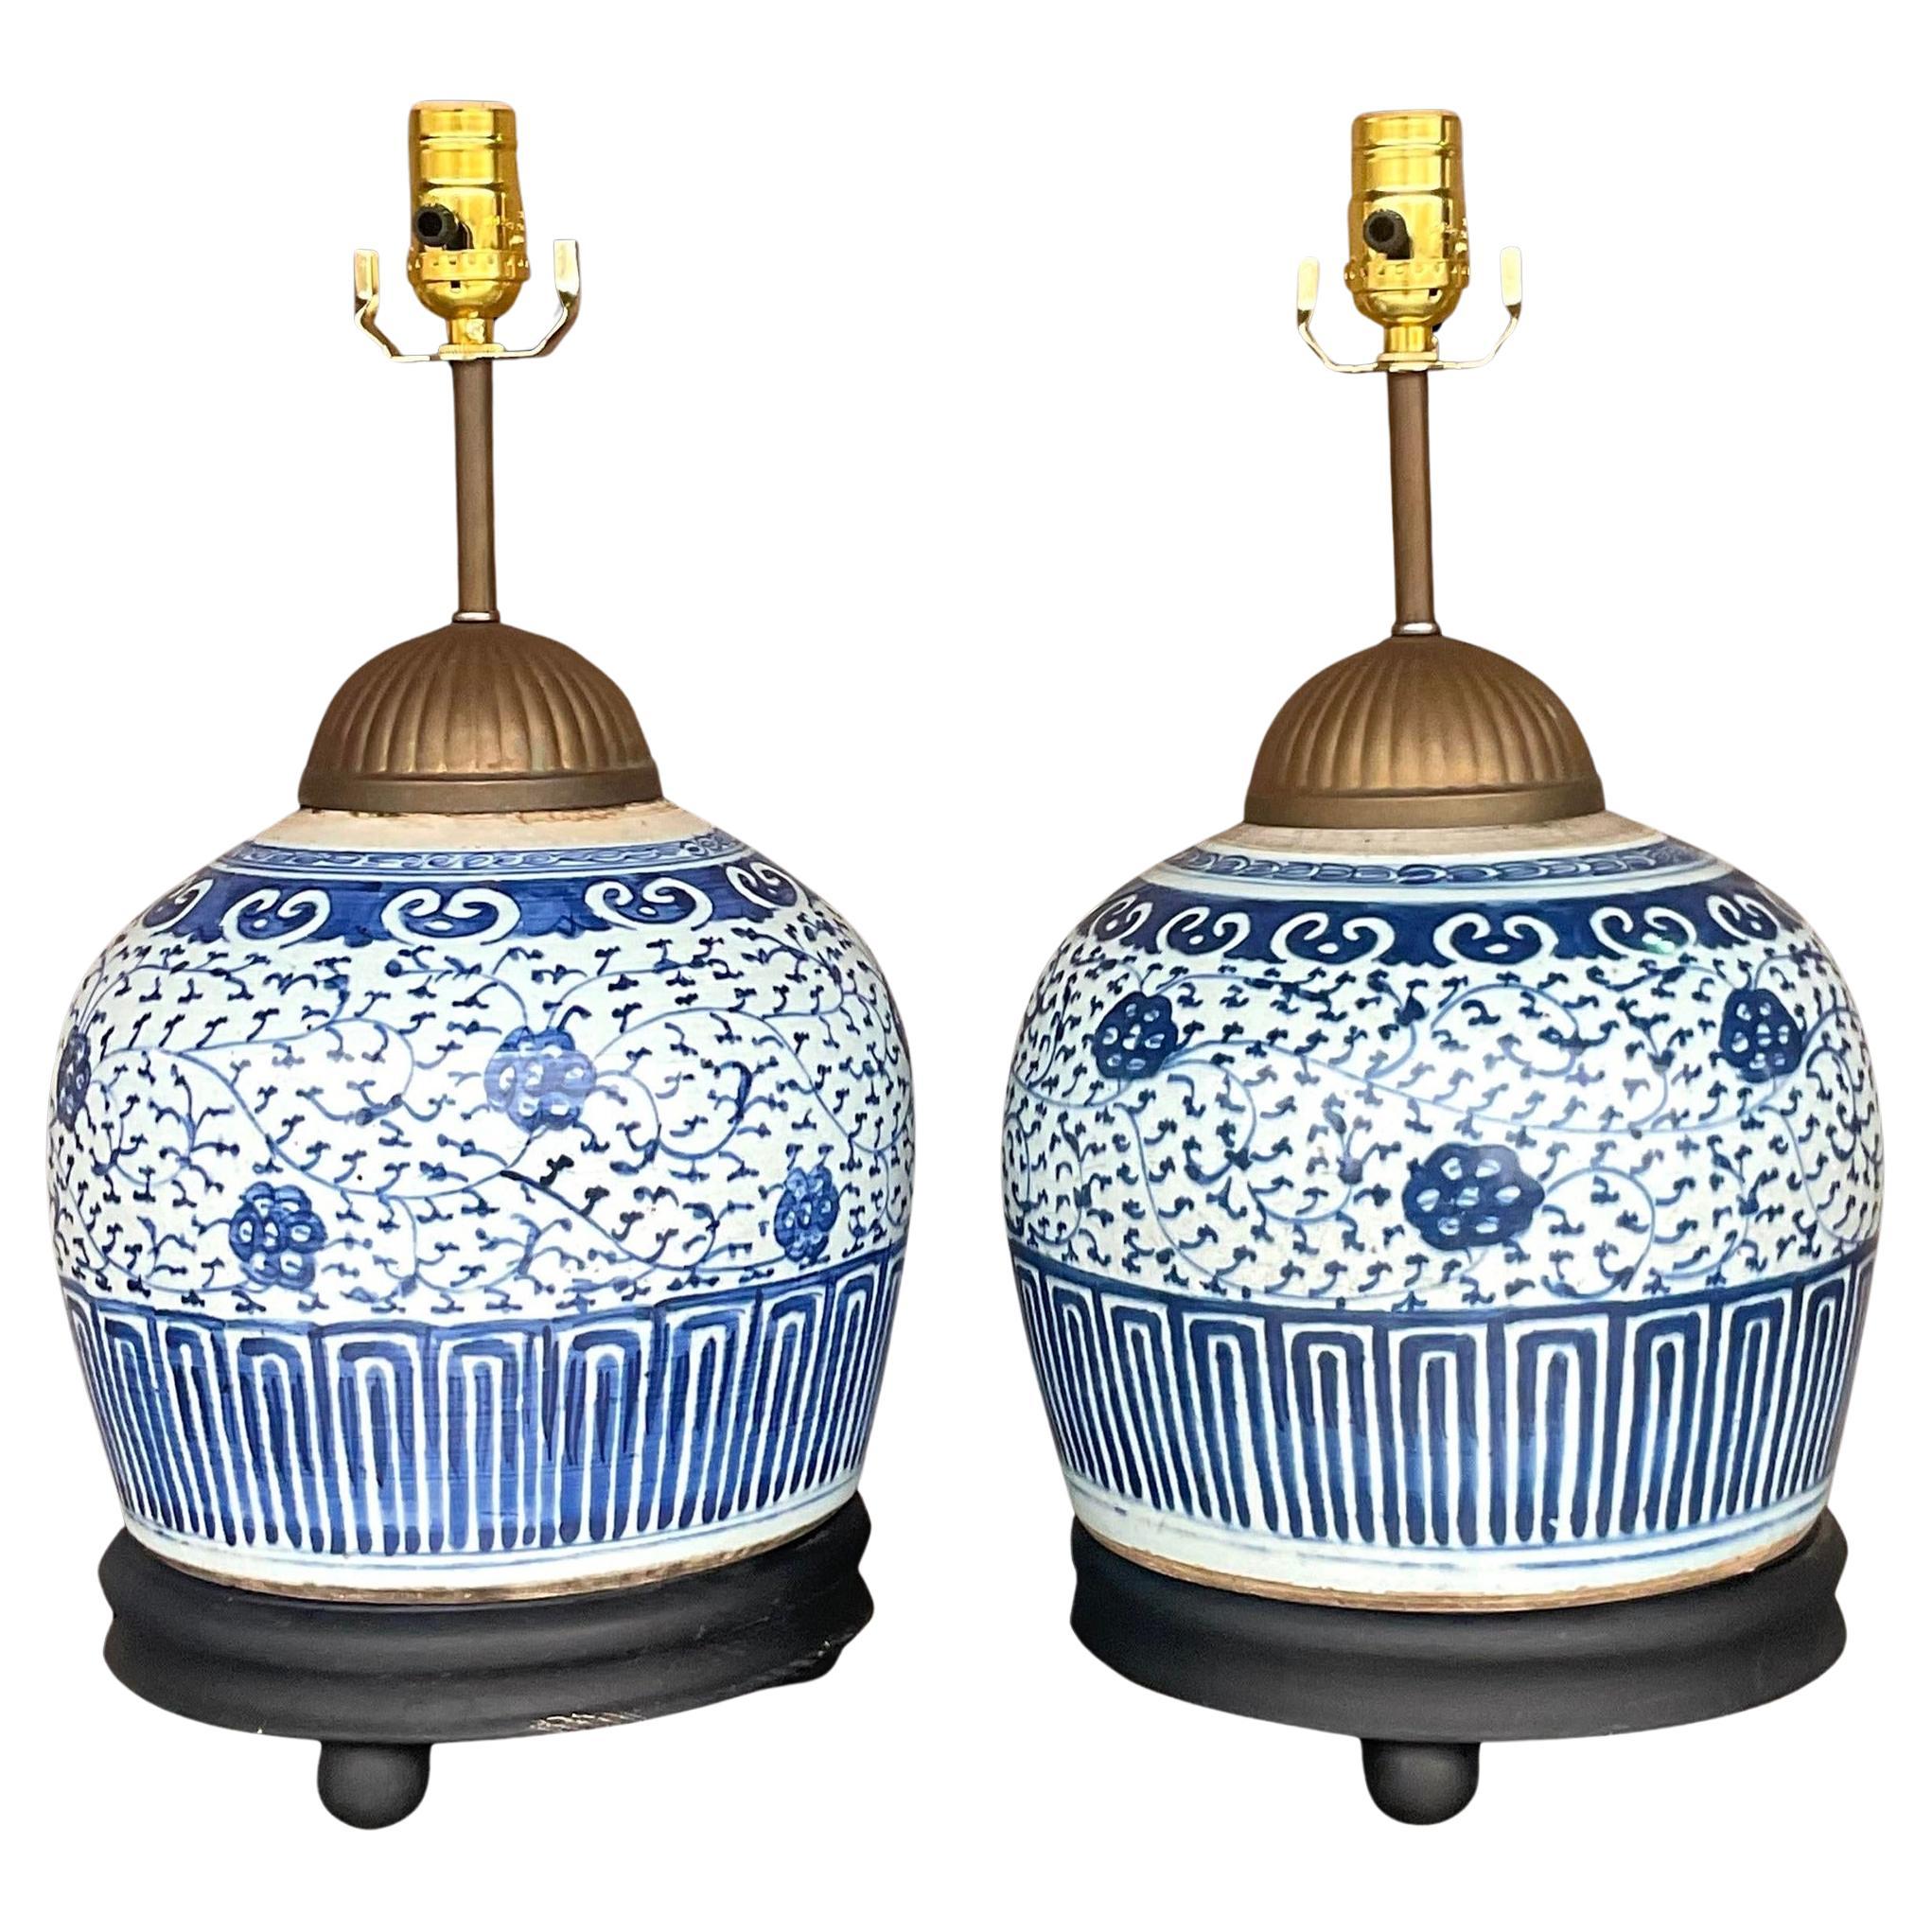 Vintage Asian Blue and White Ceramic Lamps - a Pair For Sale